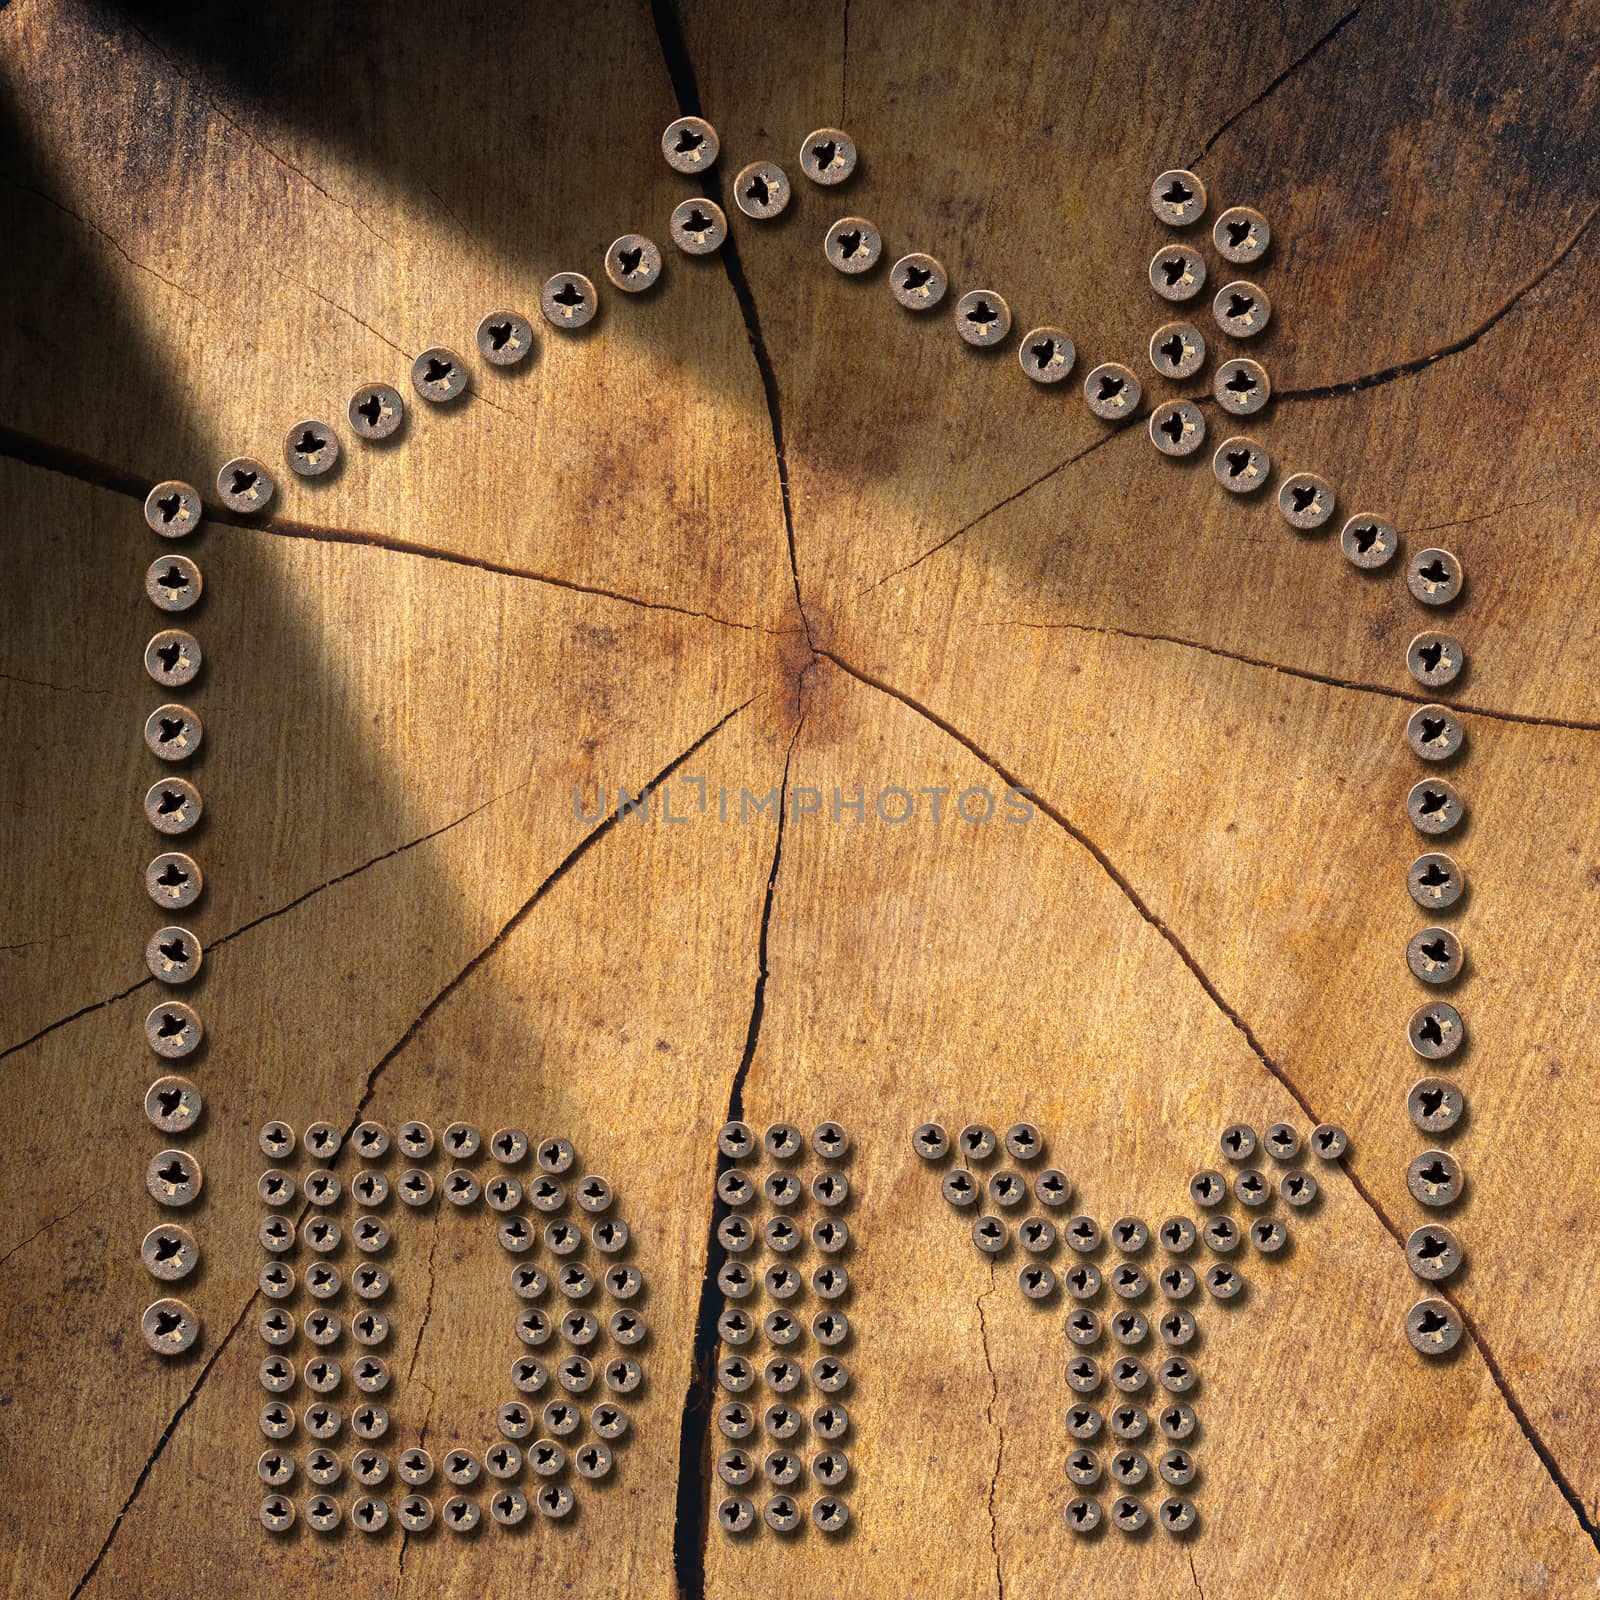 Many screws in the shape of text Diy (Do it yourself) and a house, on a brown wooden background.